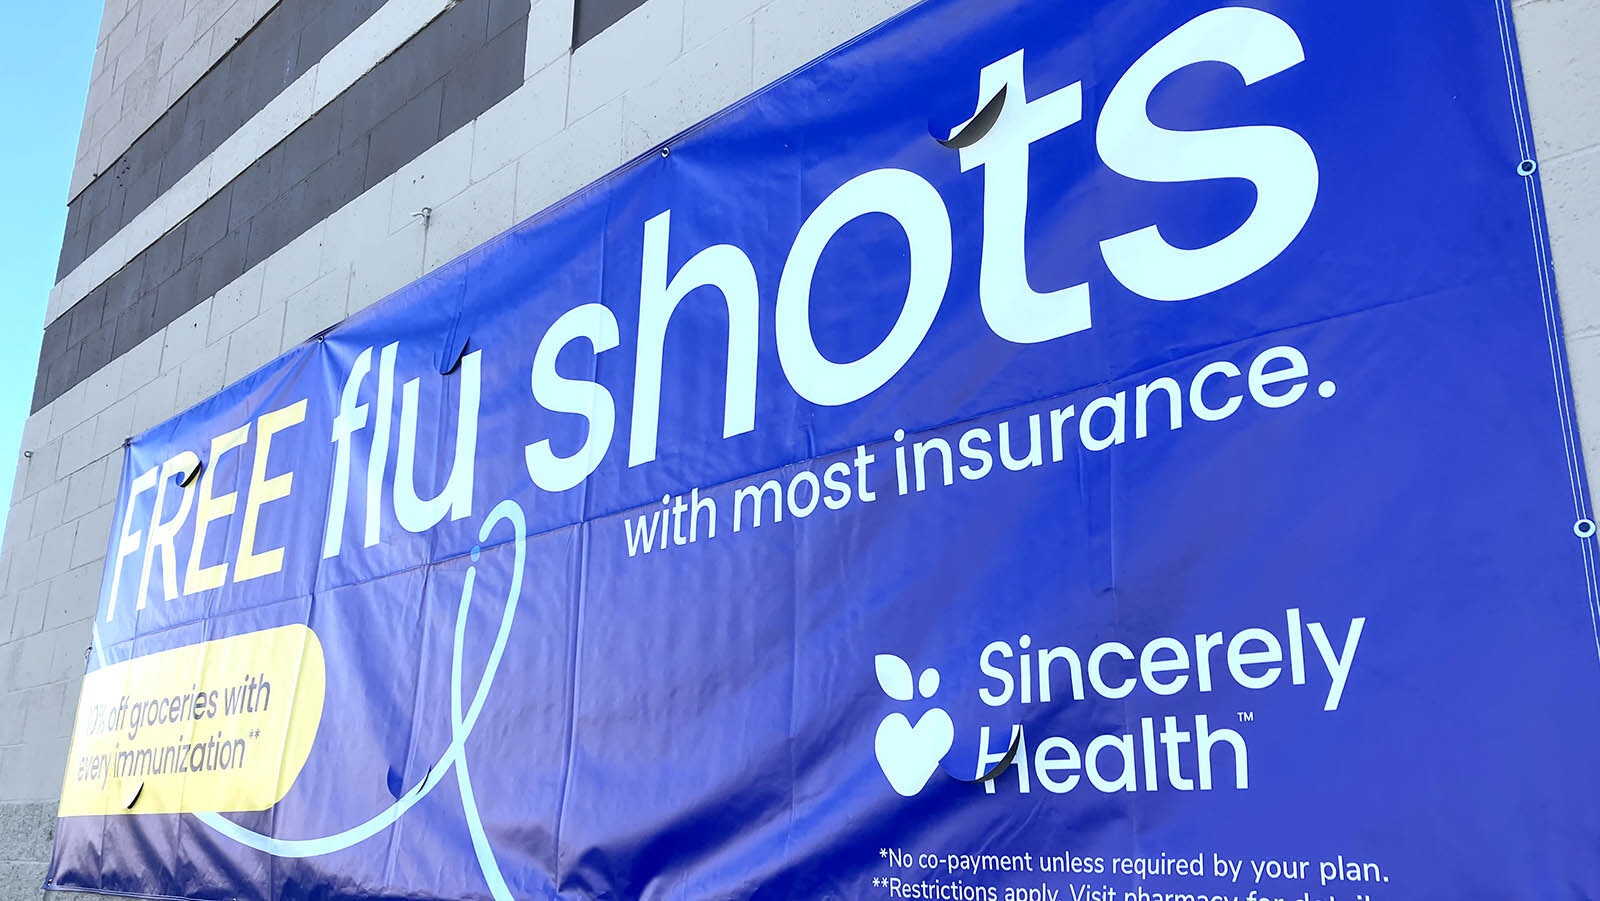 Residents in Casper can get their turkey and flu shot at the same time at Albertsons.